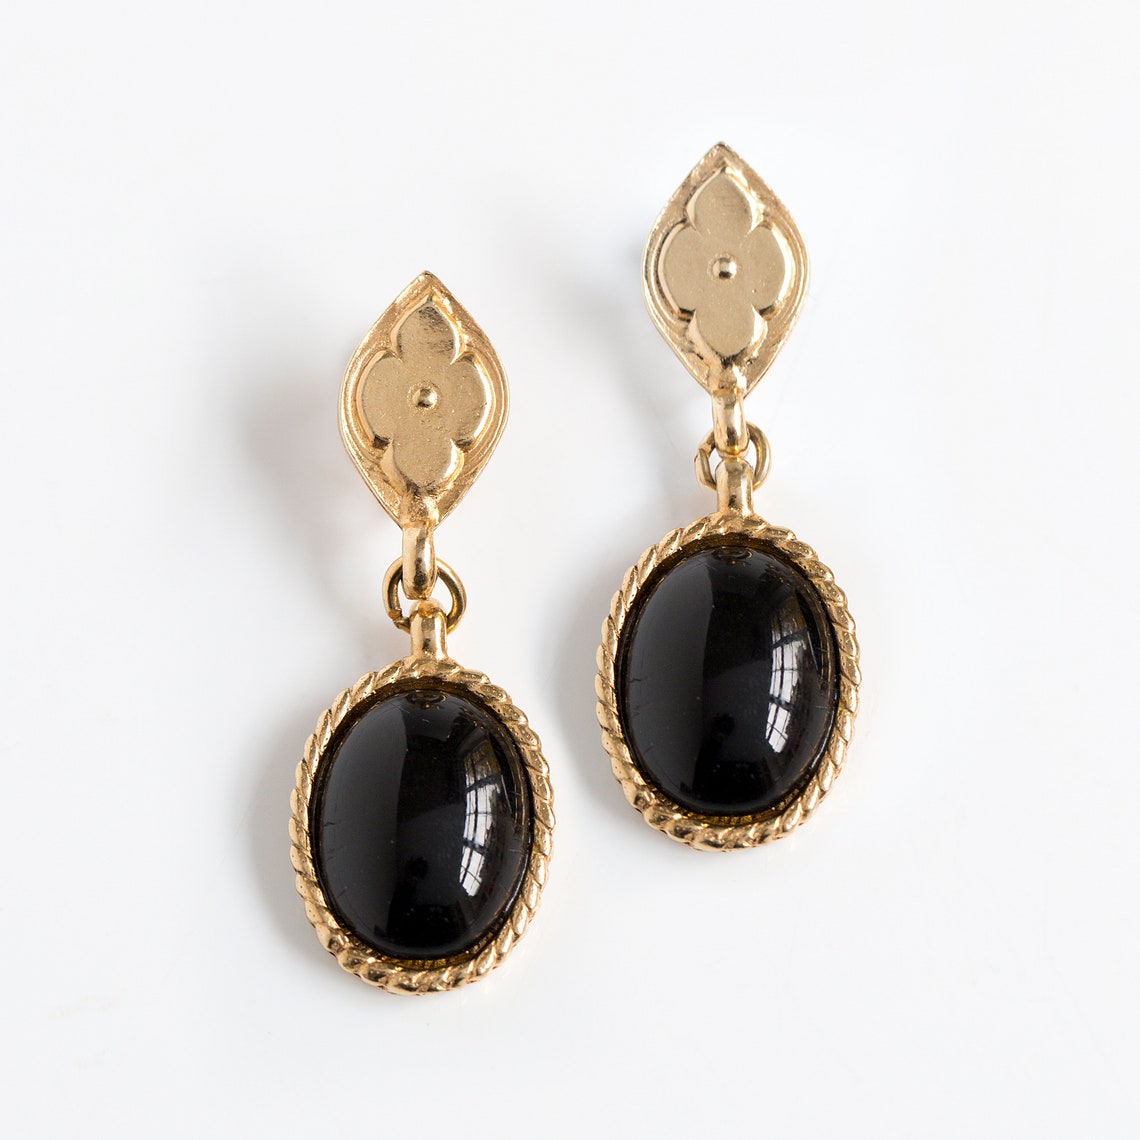 ACCESSOCRAFT Black Onyx Cabochon Screw on Dangle Earrings With Gold ...